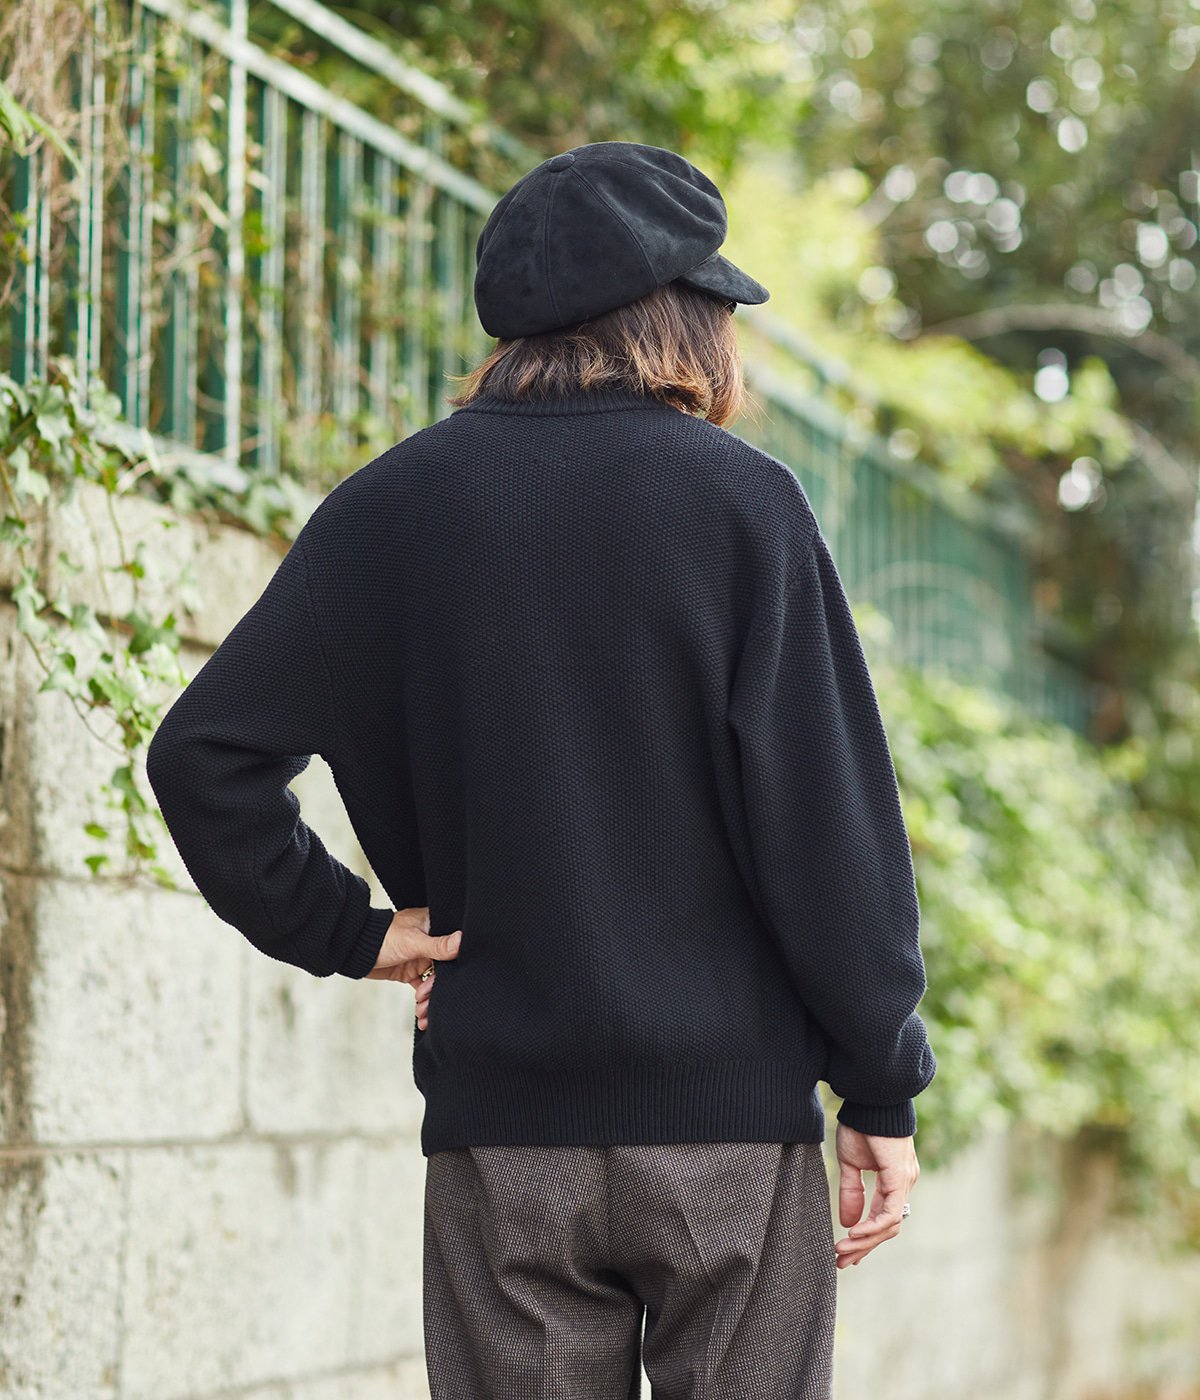 【ONLY ARK】 別注 TWISTED WOOL PIQUE DRIVERS KNIT